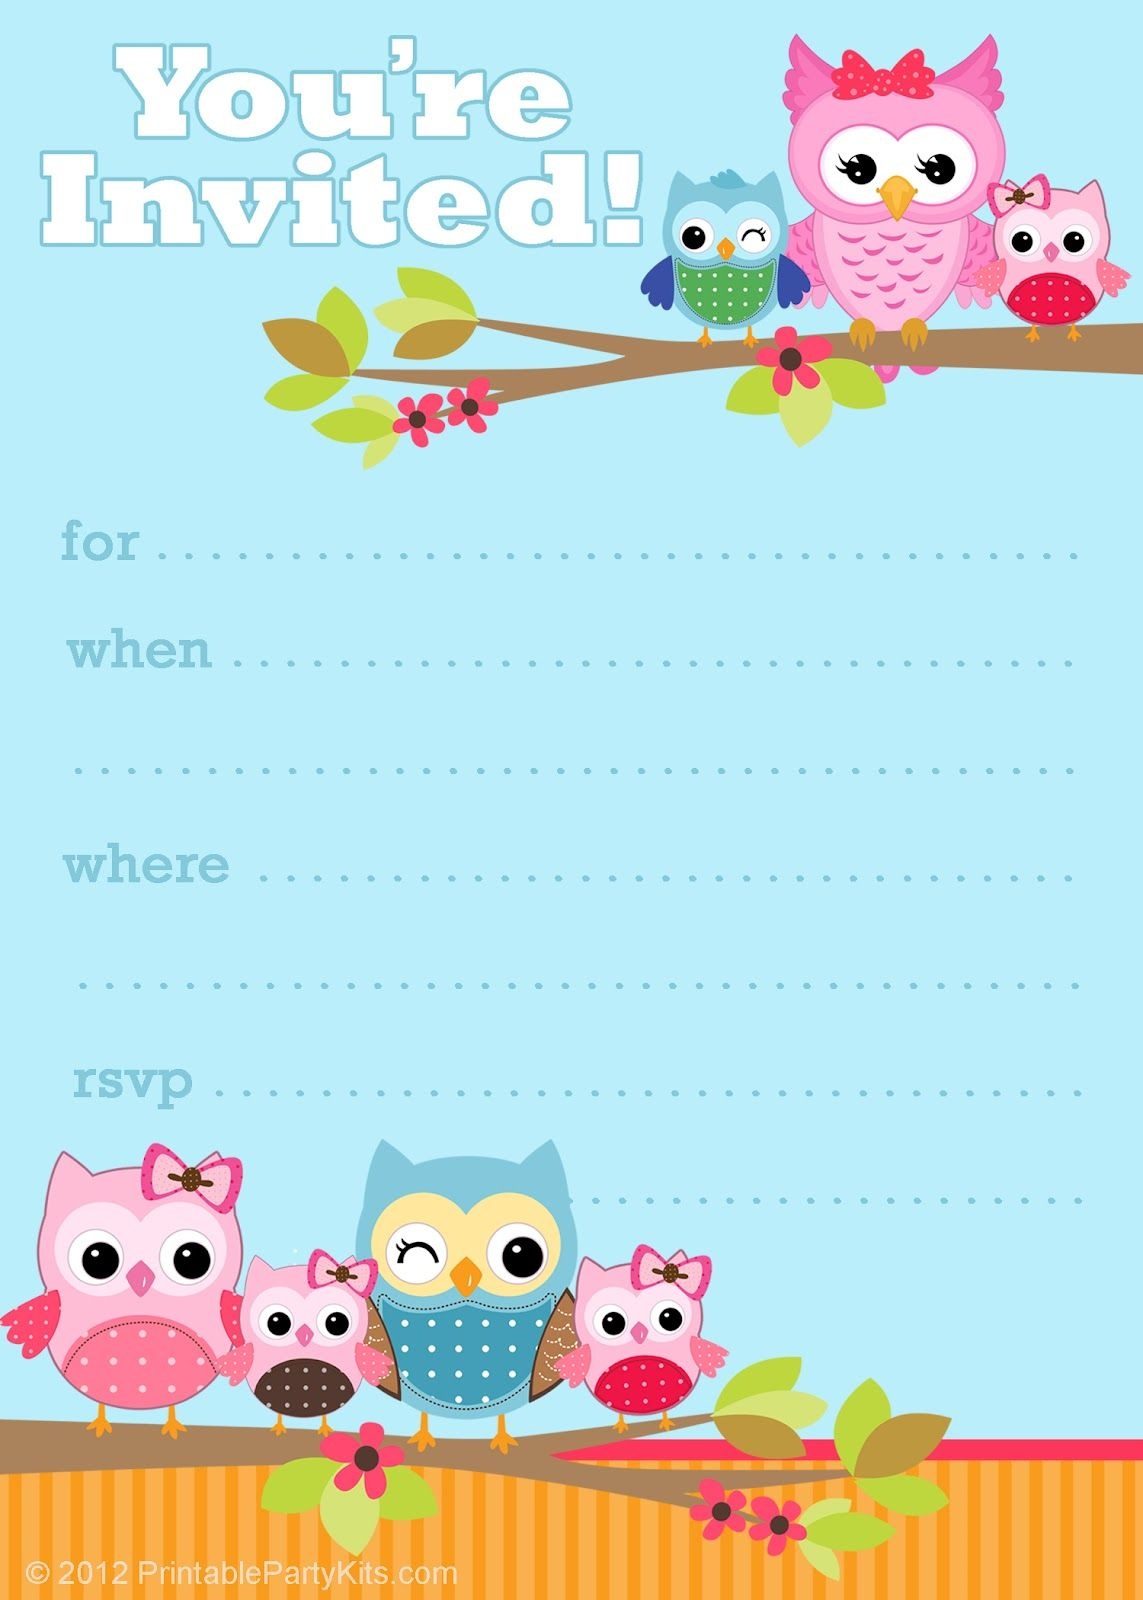 41 Printable Birthday Party Cards &amp;amp; Invitations For Kids To Make - Free Printable Party Invitations